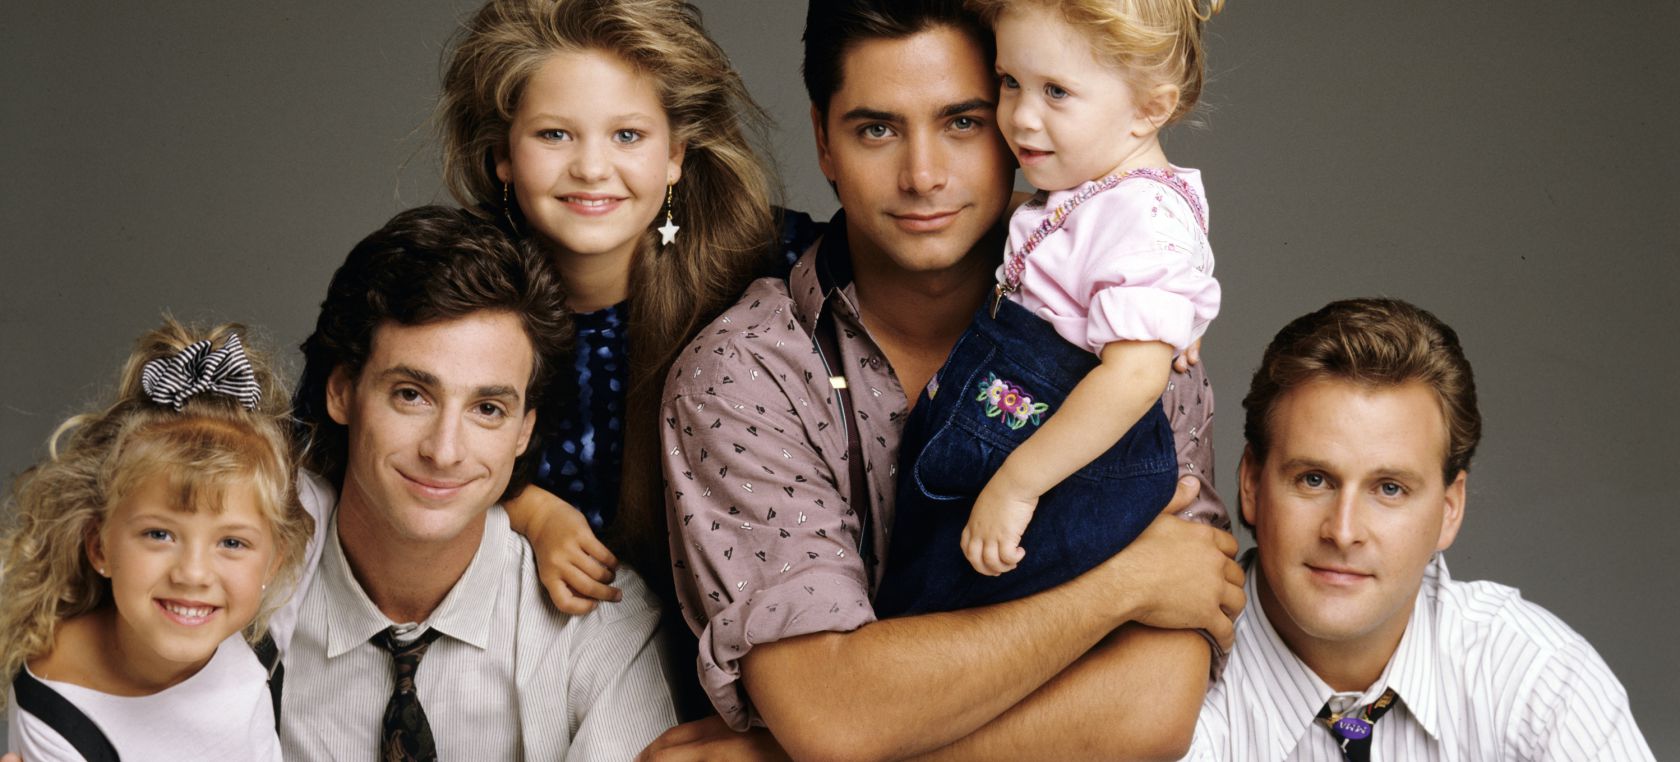 Padres forzosos (Full House)